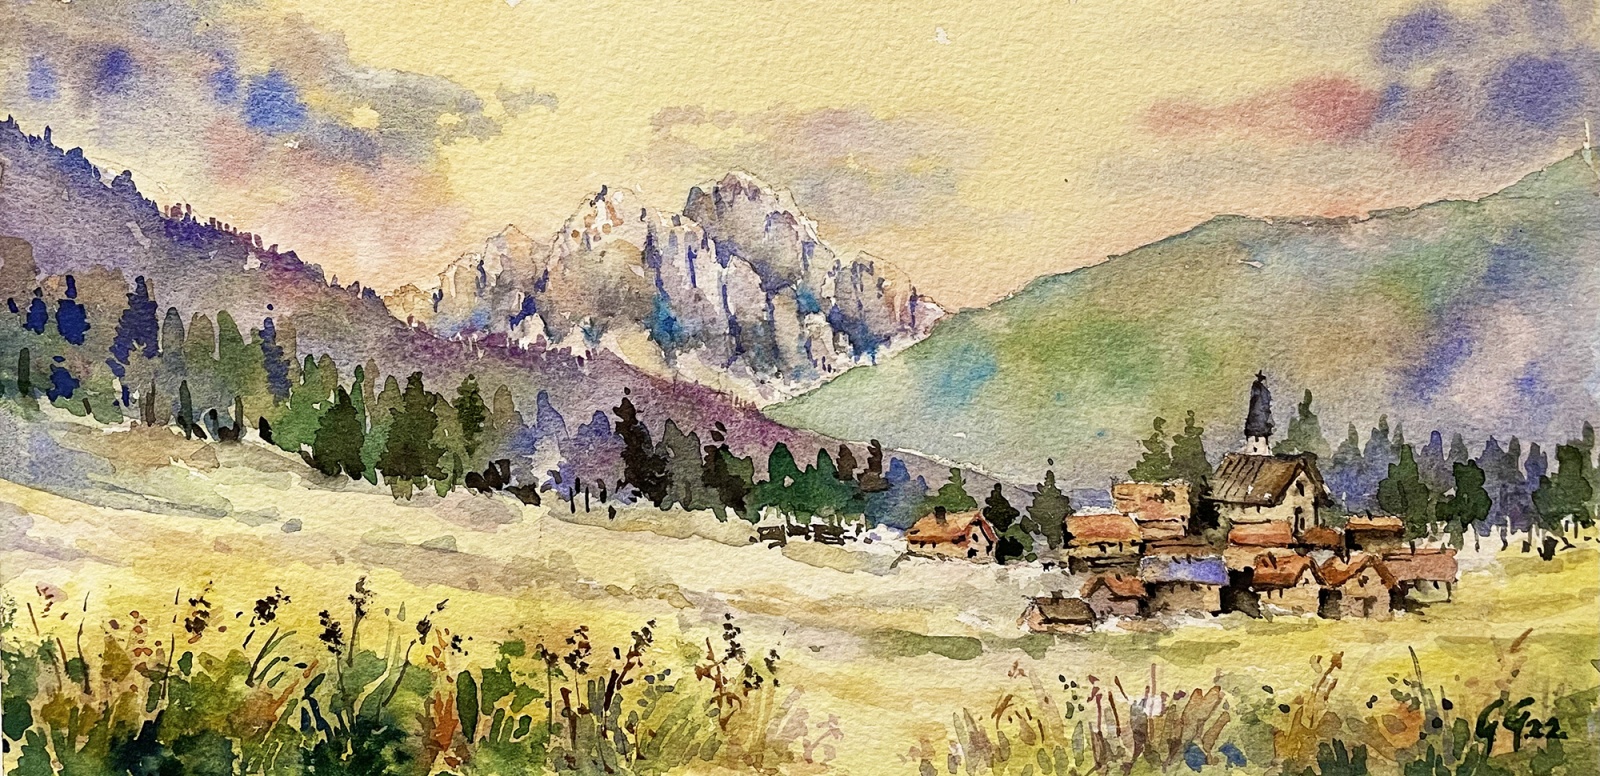 Peaceful mountain  - watercolour on paper
15x20 cm